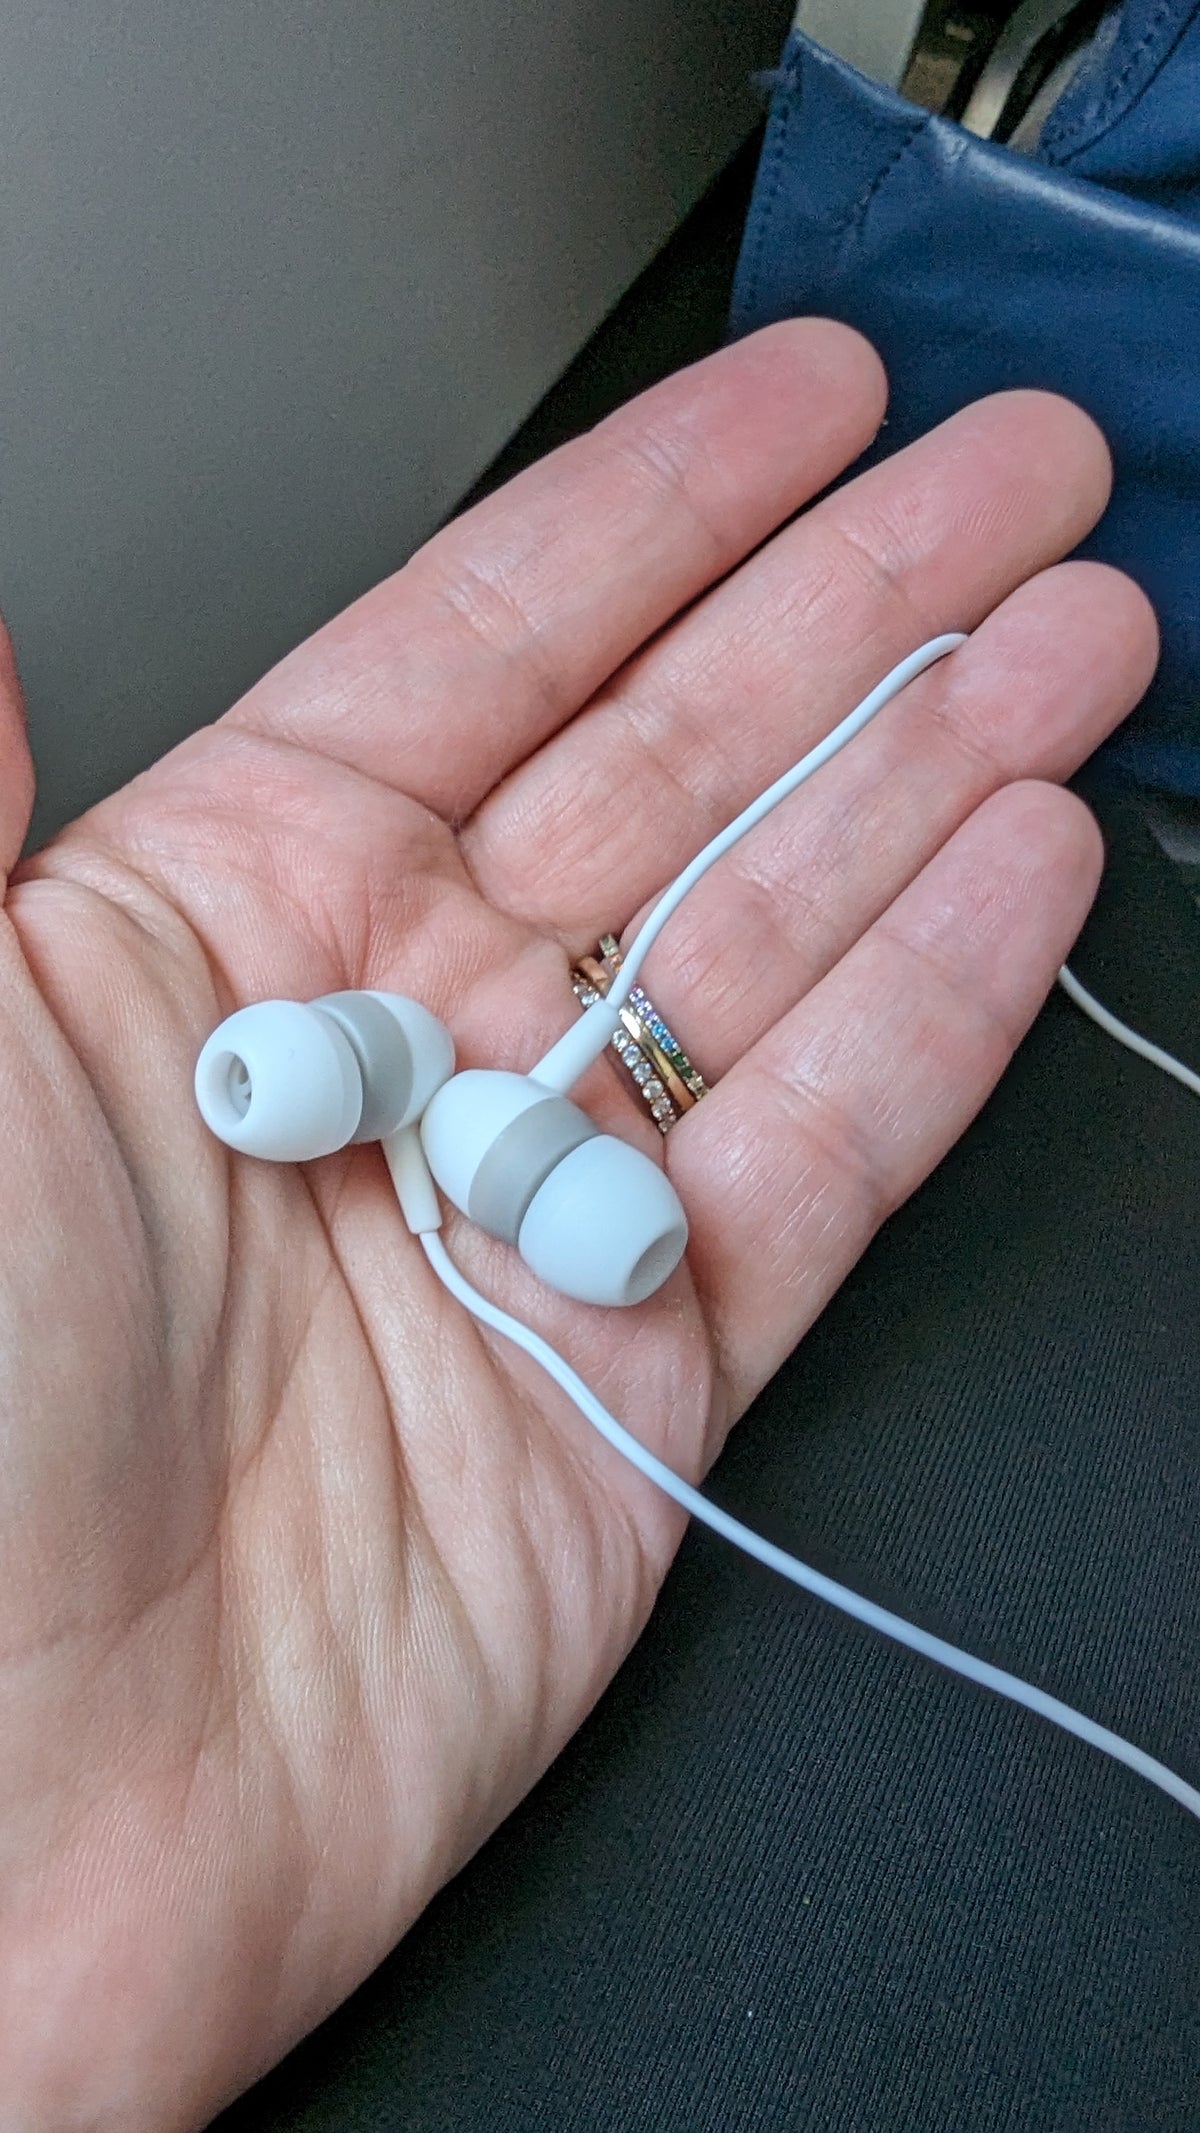 IAH to ATL Delta flight review earbuds 